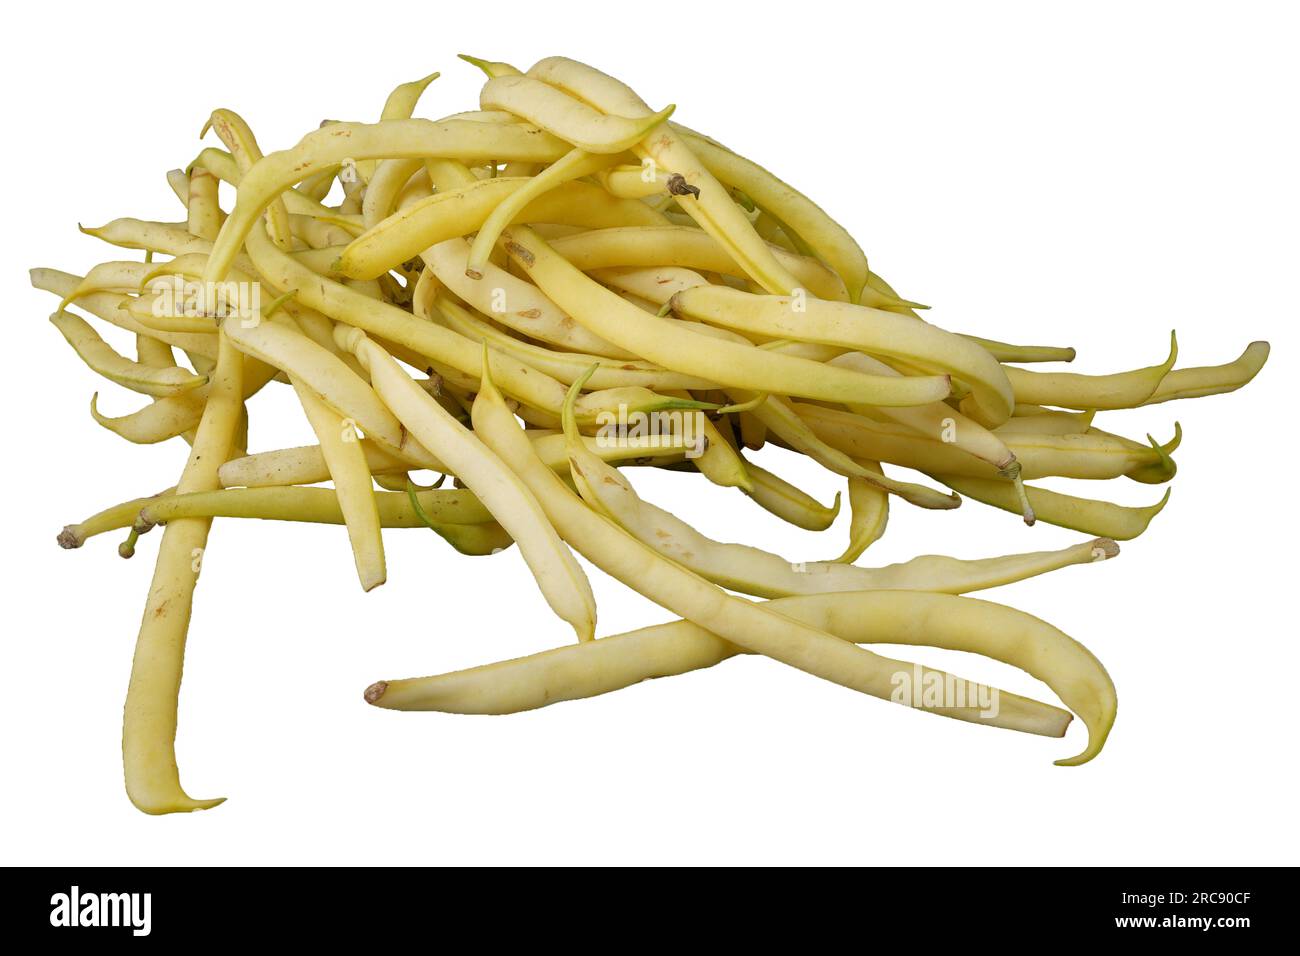 https://c8.alamy.com/comp/2RC90CF/yellow-string-beans-french-beans-yellow-beans-without-background-2RC90CF.jpg